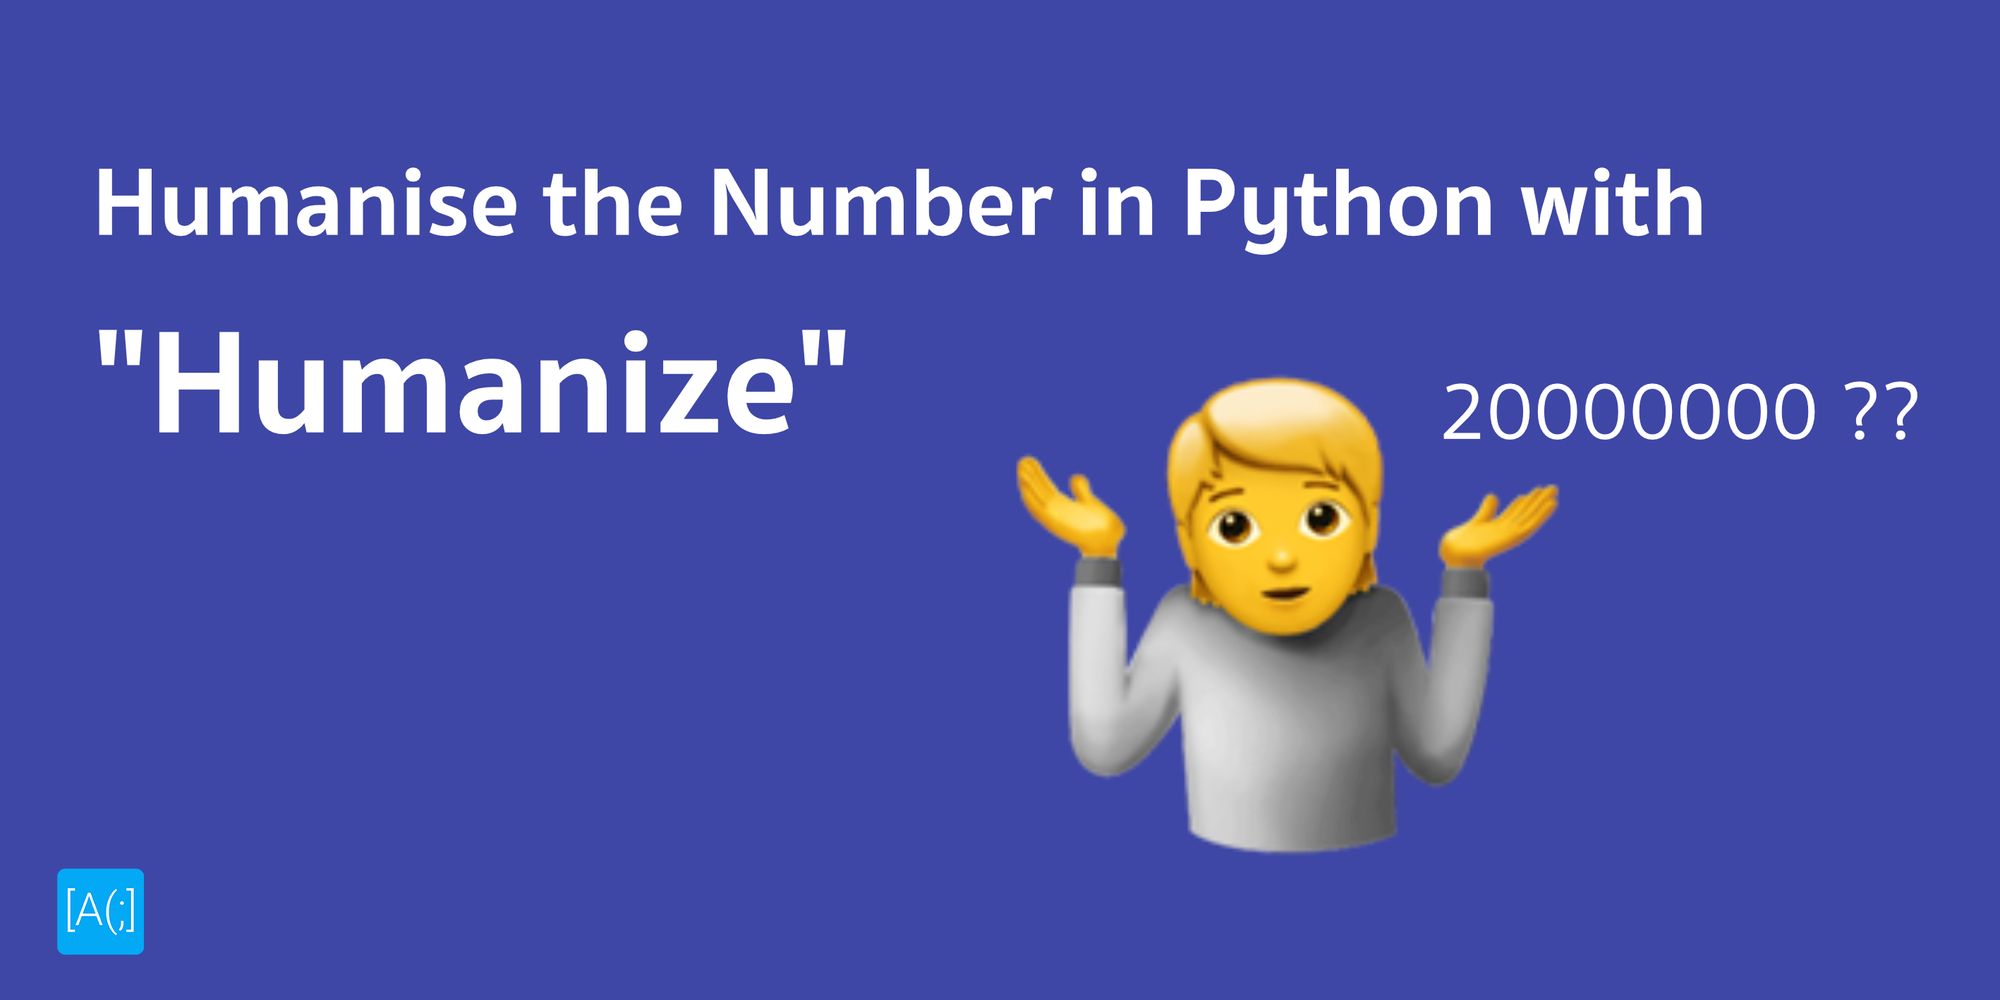 Humanise the Number in Python with "Humanize"